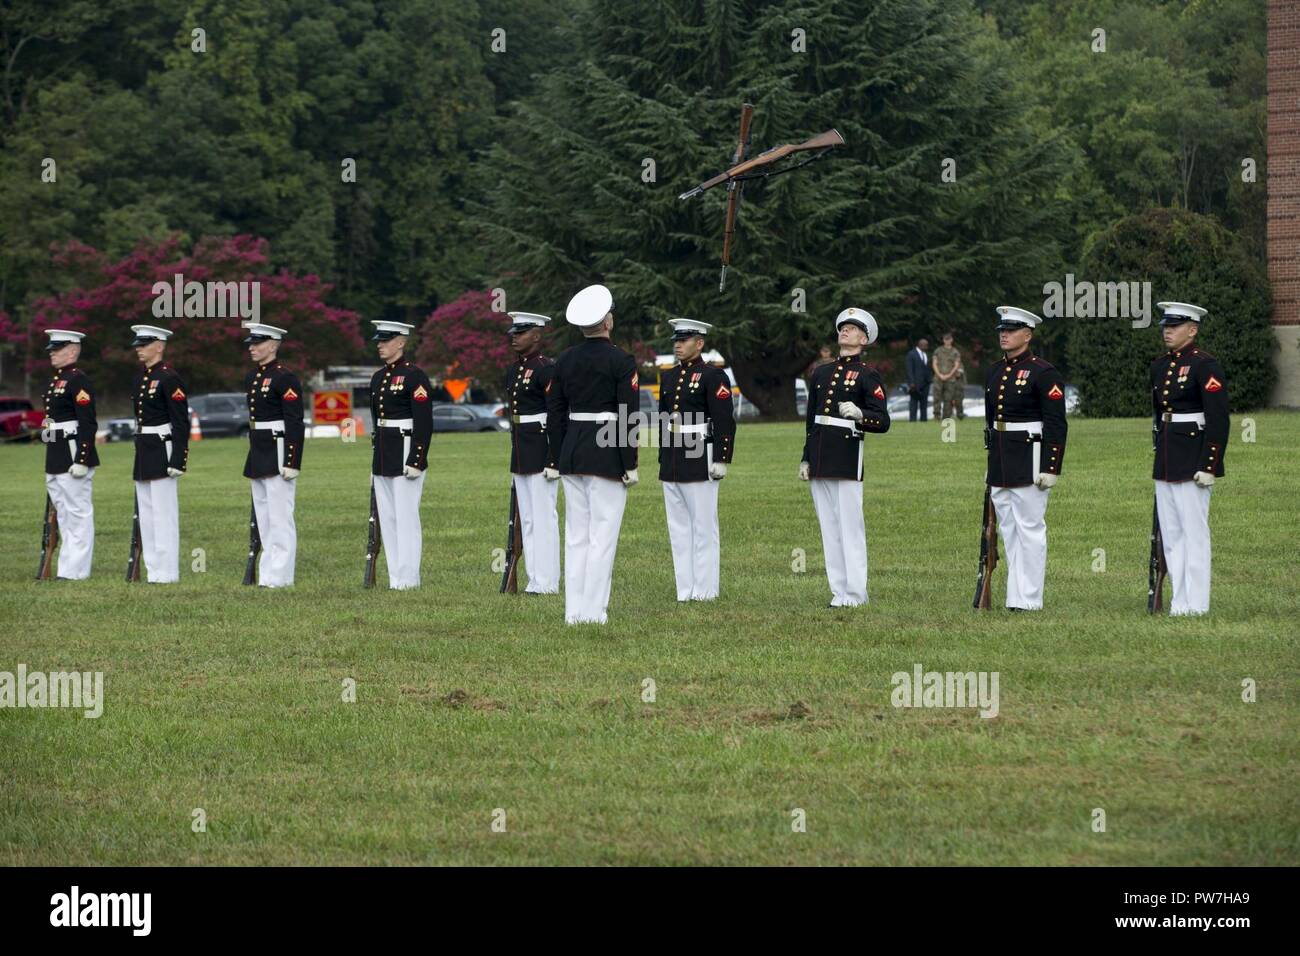 U.S. Marine Corps Silent Drill Platoon performs at the 35th annual United States Marine Corps’ Enlisted Awards Parade and Presentation on Marine Corps Base Quantico, Va., Sept. 20, 2017. The presentation is held to recognize individual achievements of enlisted Marines throughout the Marine Corps. Stock Photo